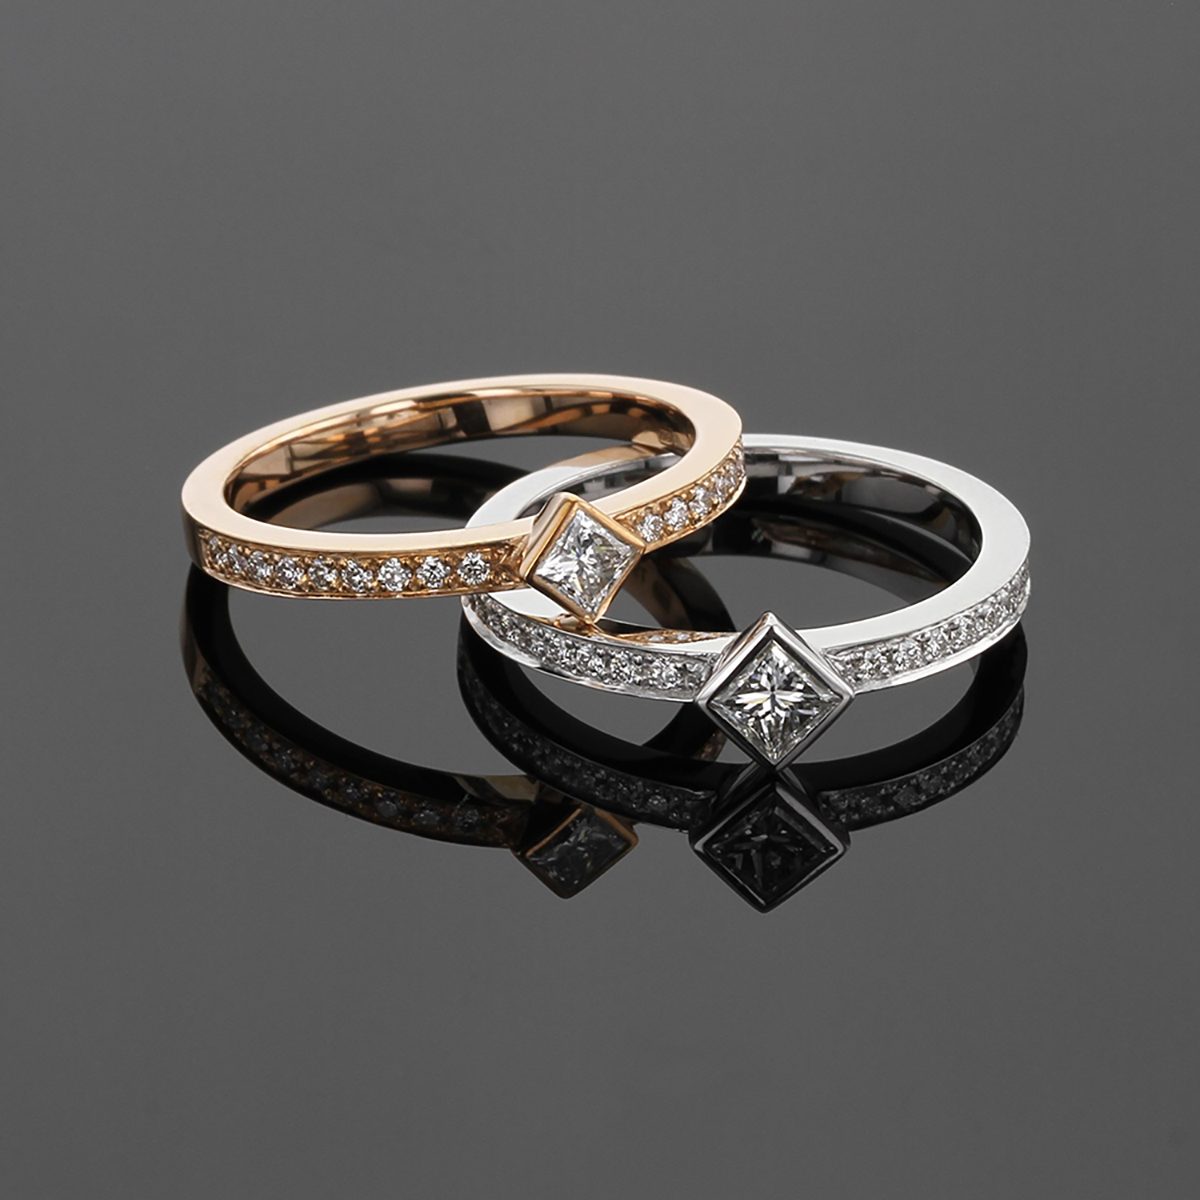 18ct rose and white gold rings with a square shaped center diamond and smaller diamonds on the band.